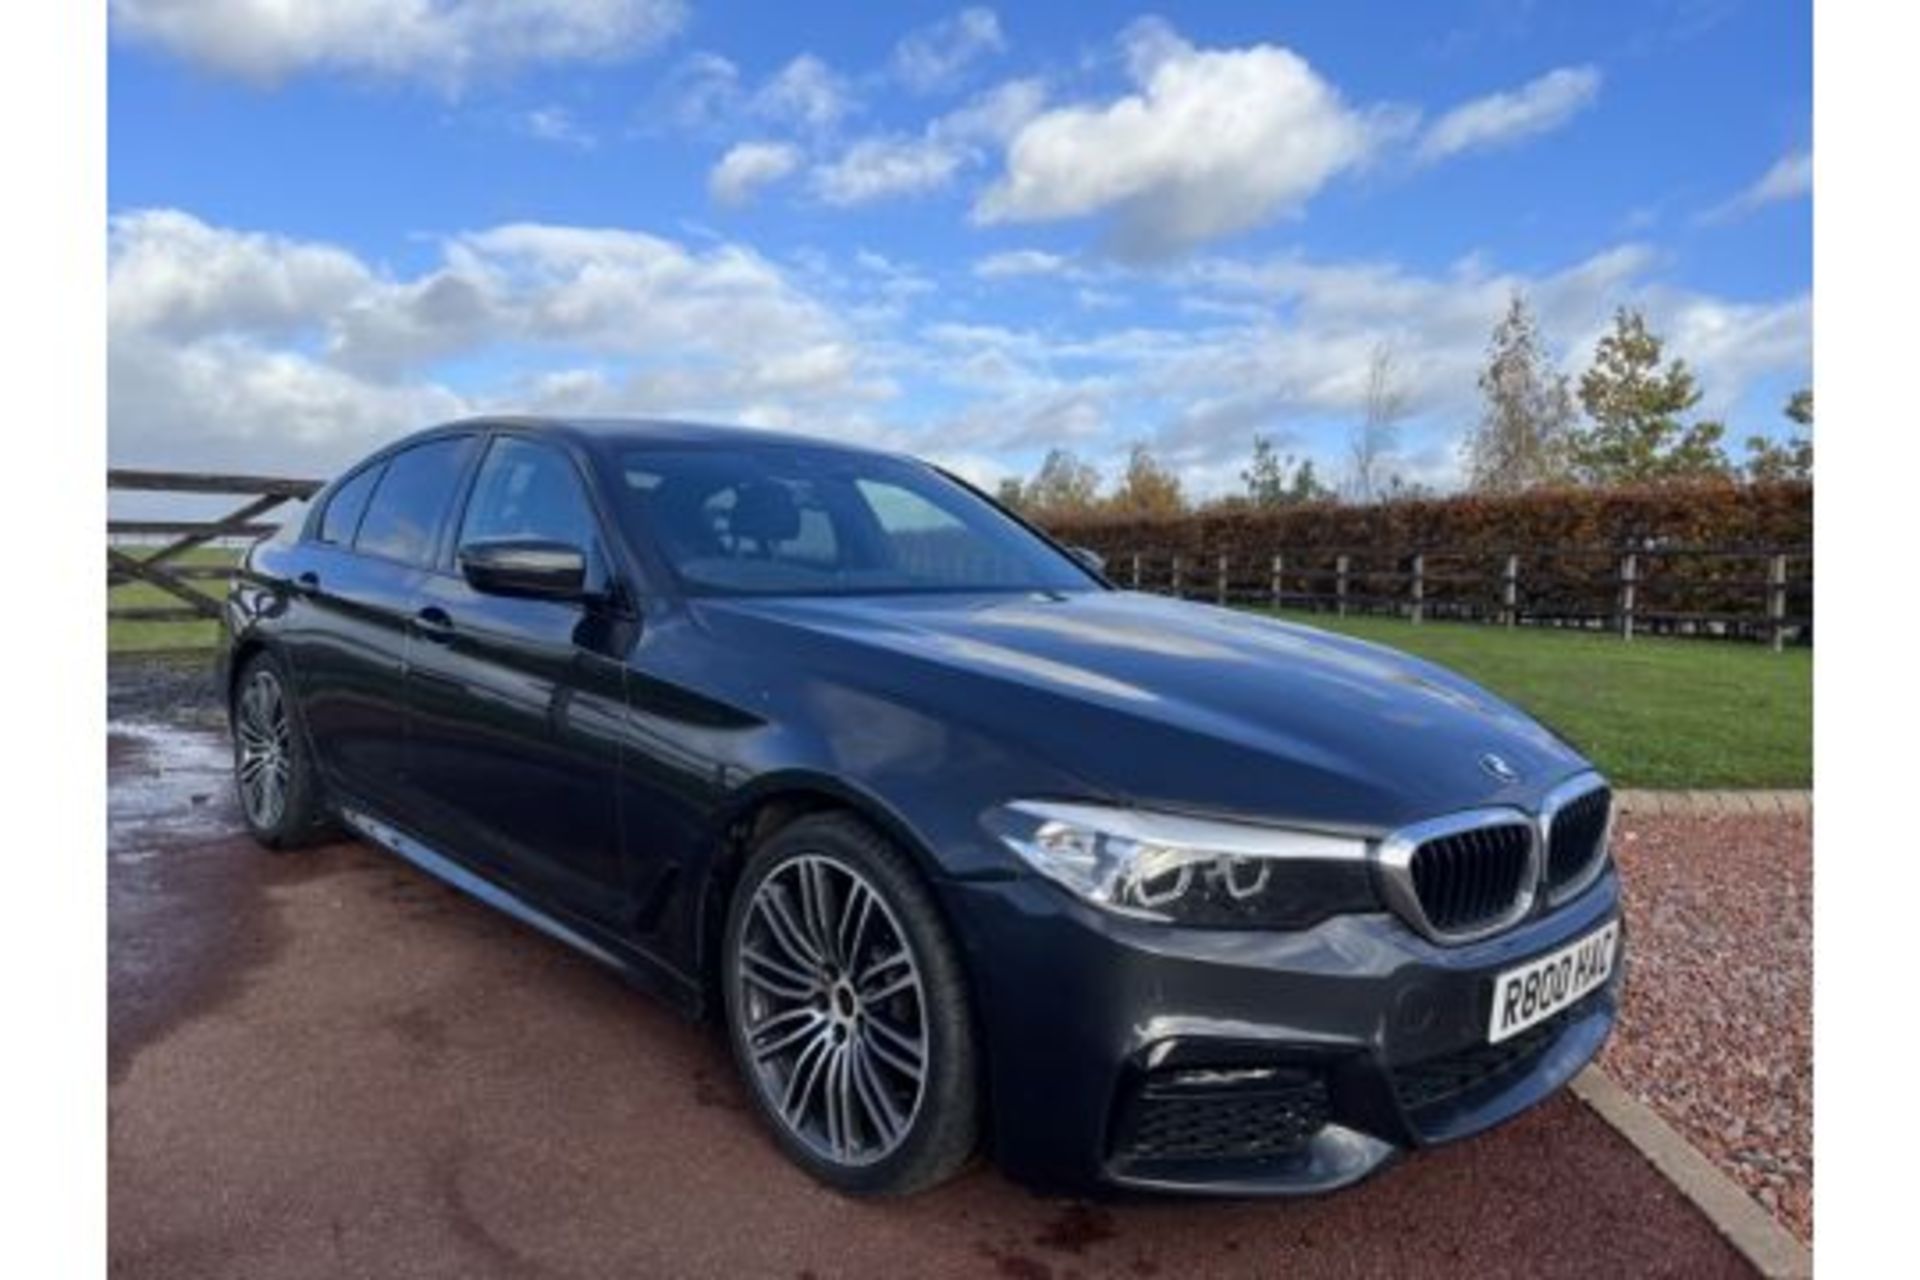 (RESERVE MET)BMW 5 Series 520D "M SPORT" Automatic 2019 19 Reg - Air Con - Full Leather - 63k Miles - Image 2 of 12